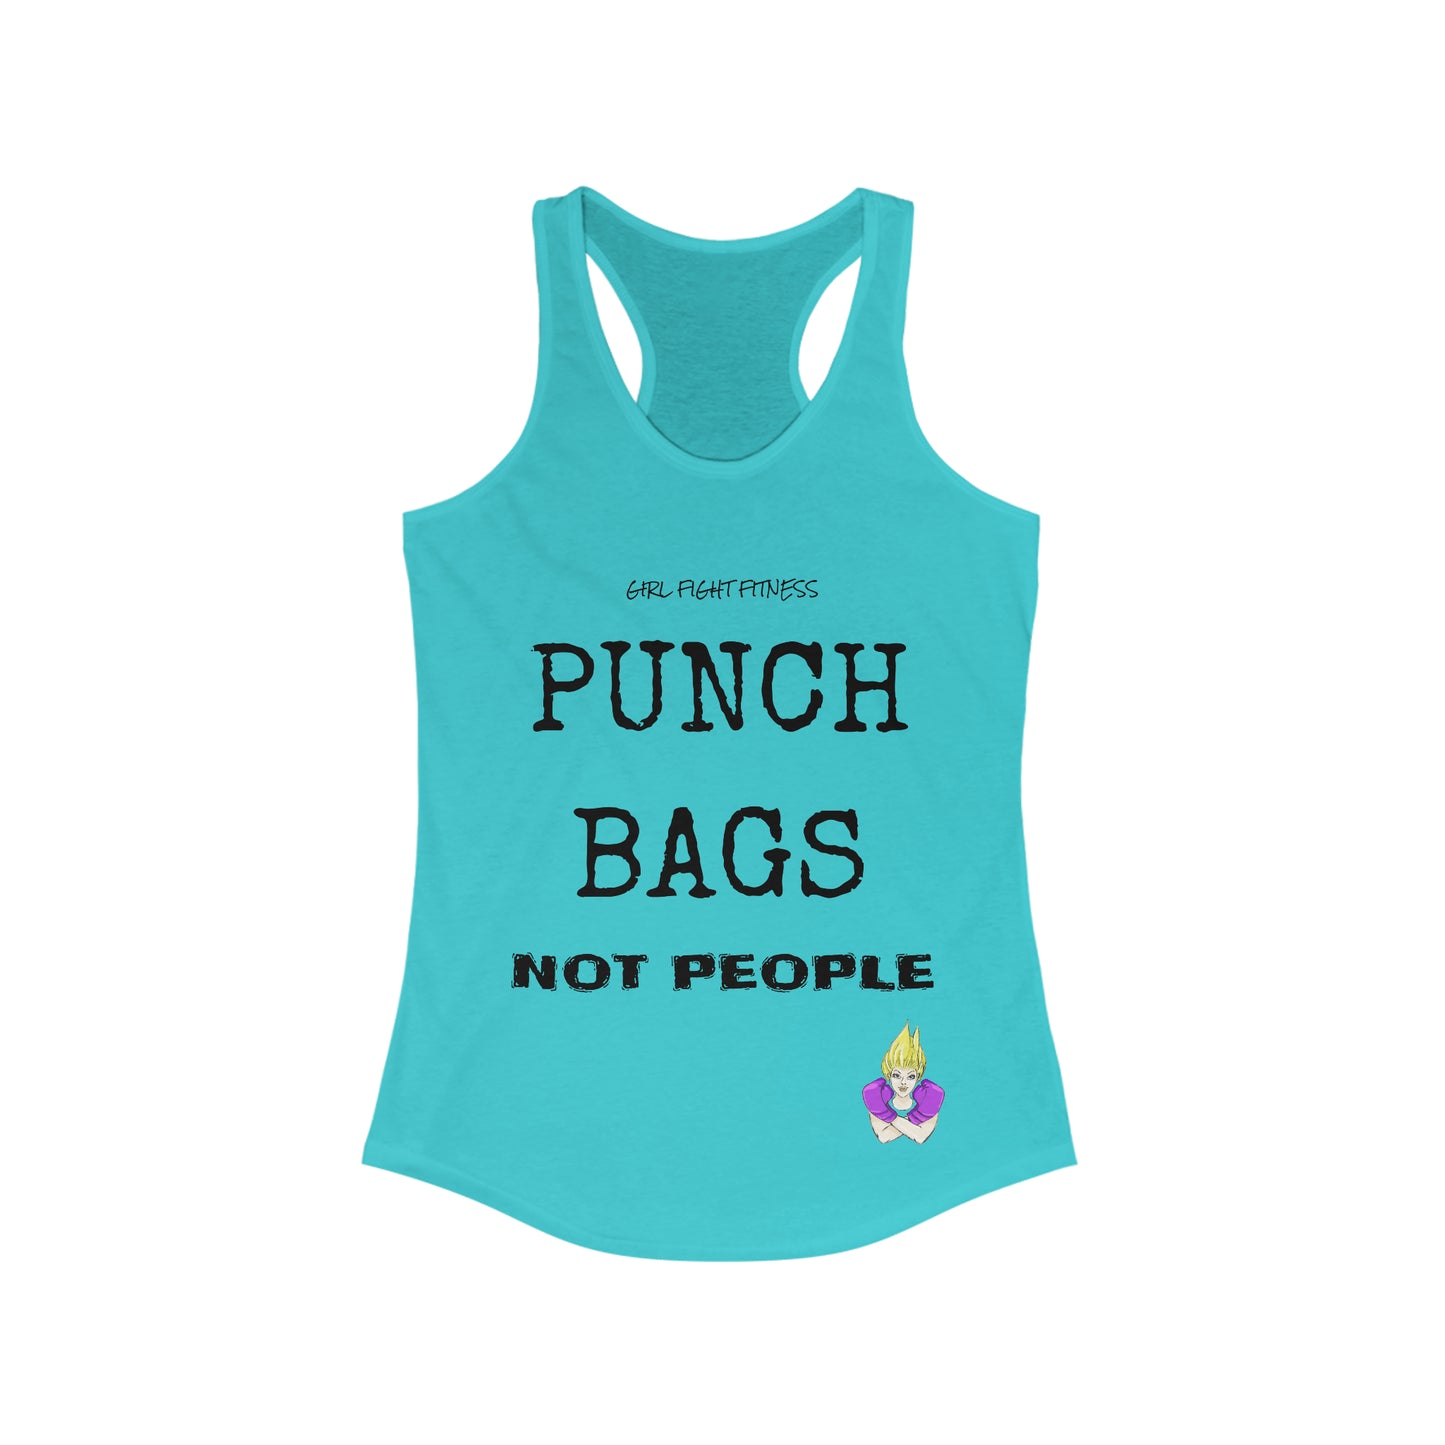 Punch Bags - Not People Racerback Tank